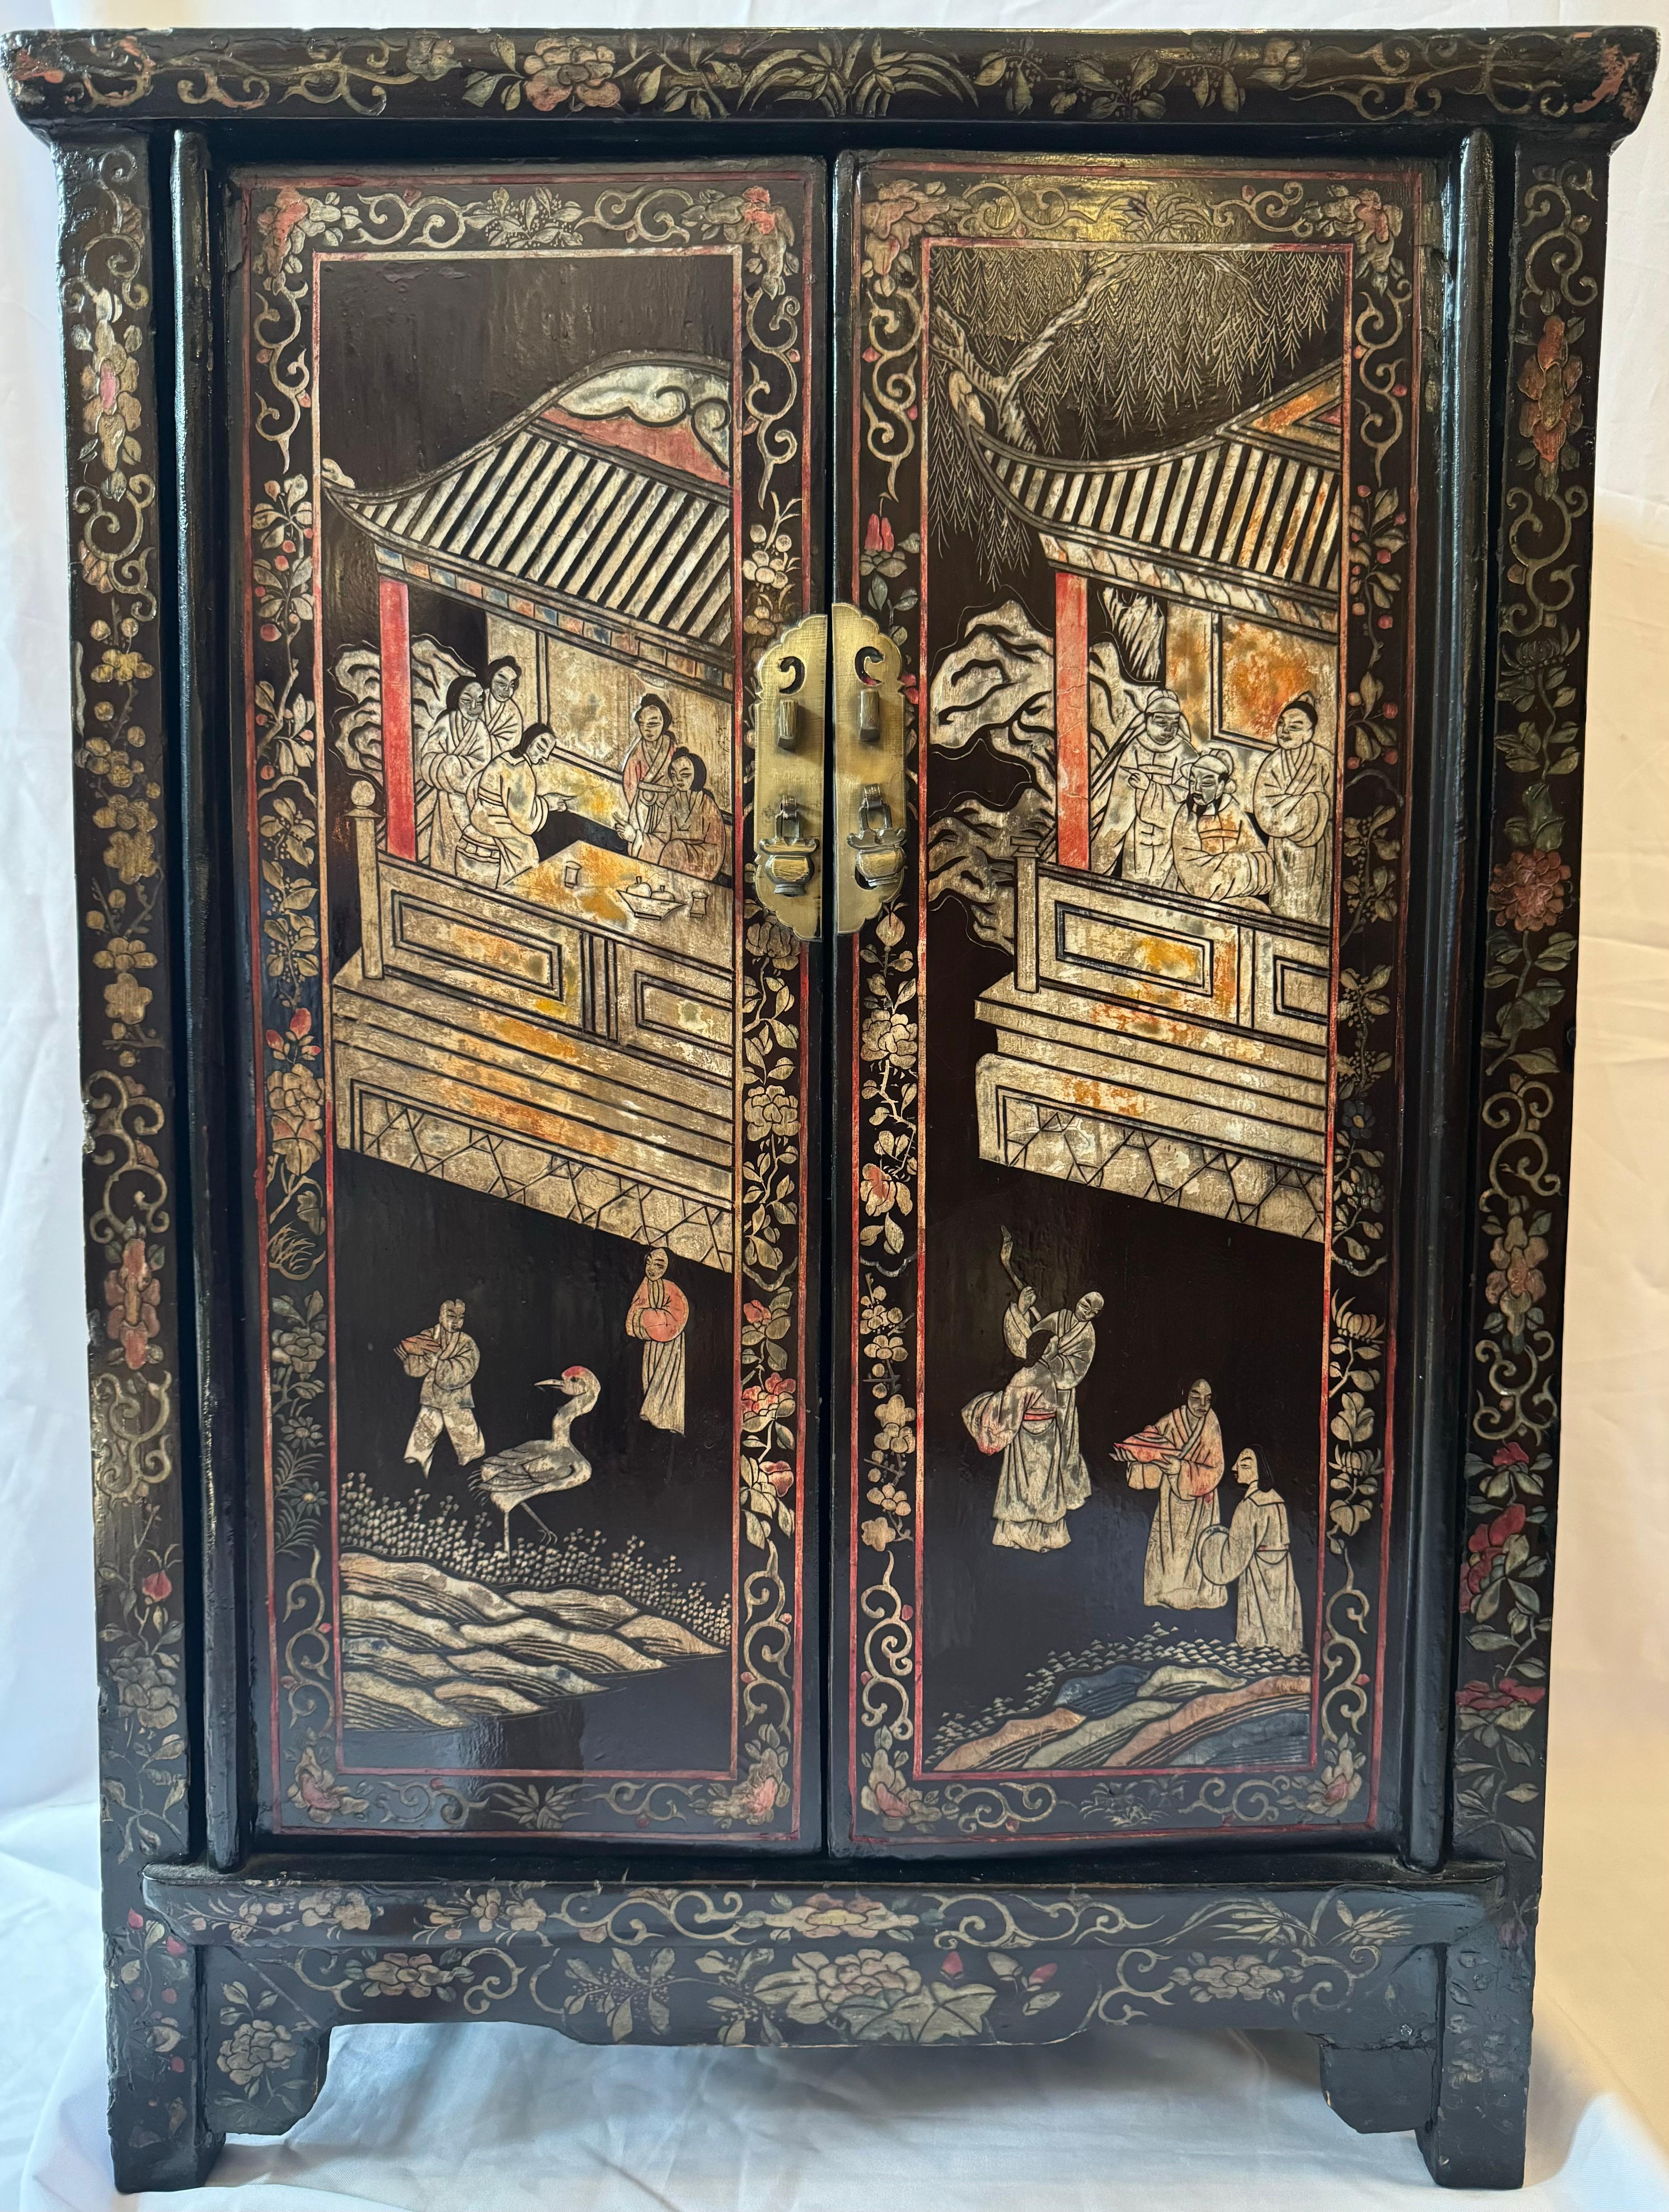 This 19th-century Chinese Chinoiserie lacquer side cabinet is a splendid testament to the enduring allure of the Chinoiserie movement that swept through Europe in the 17th century. As European fascination with Asian art and culture reached its